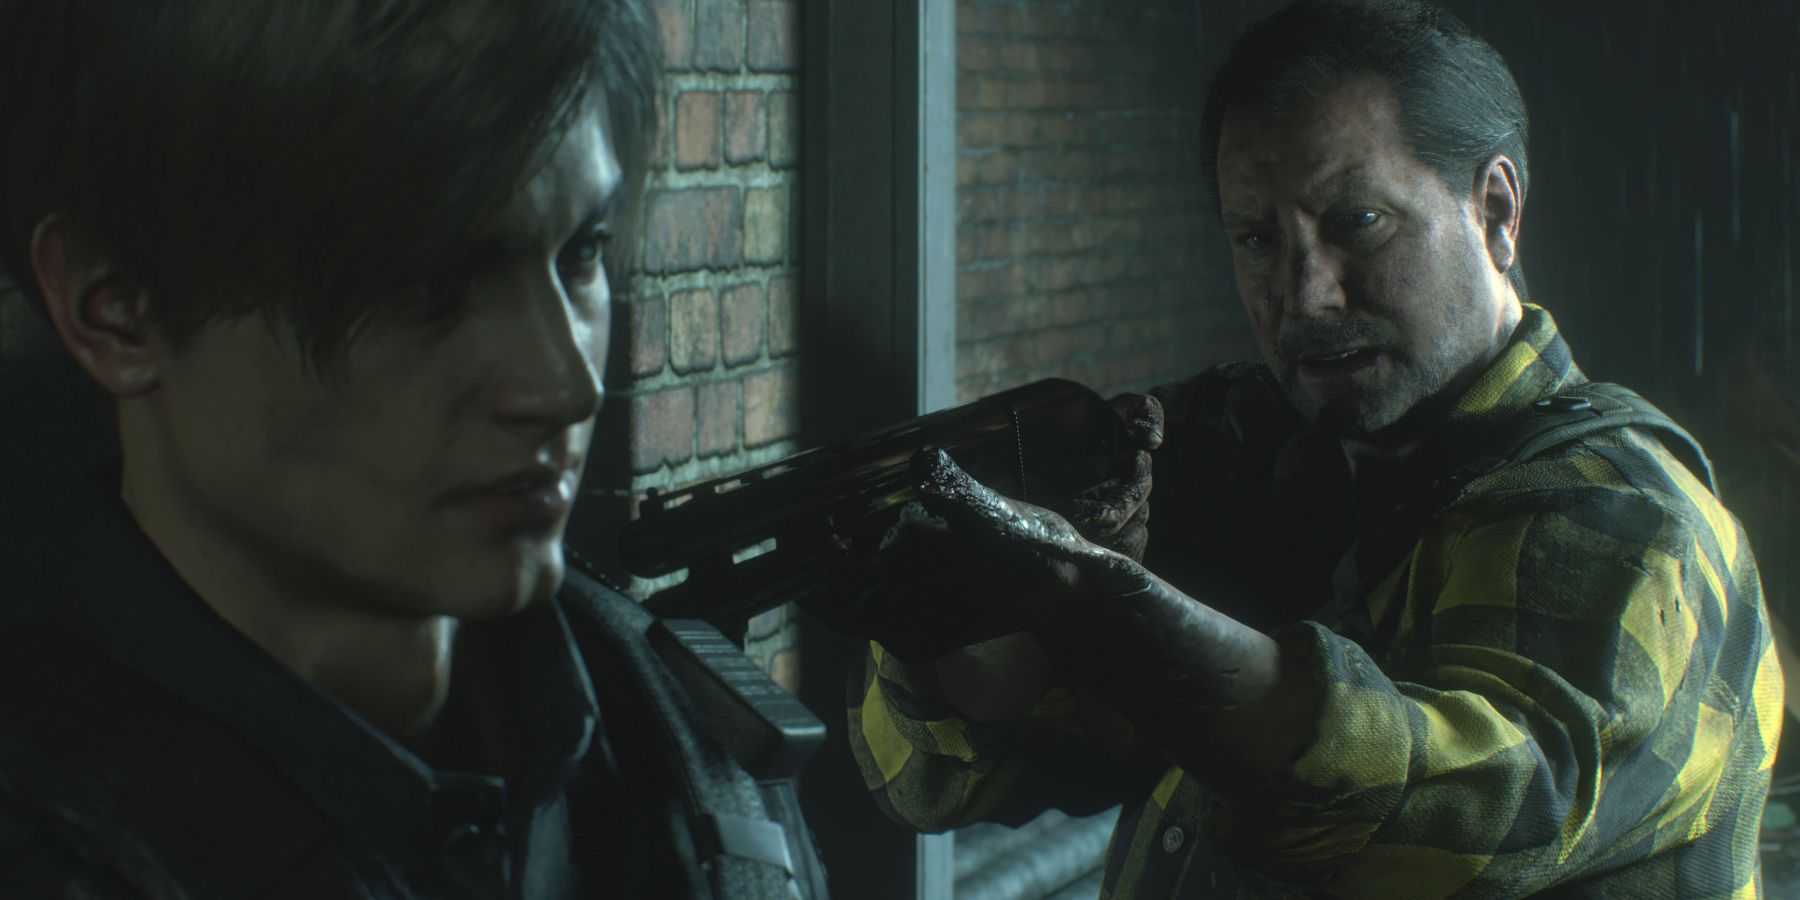 Resident Evil 2 Robert Kendo with a gun on Leon